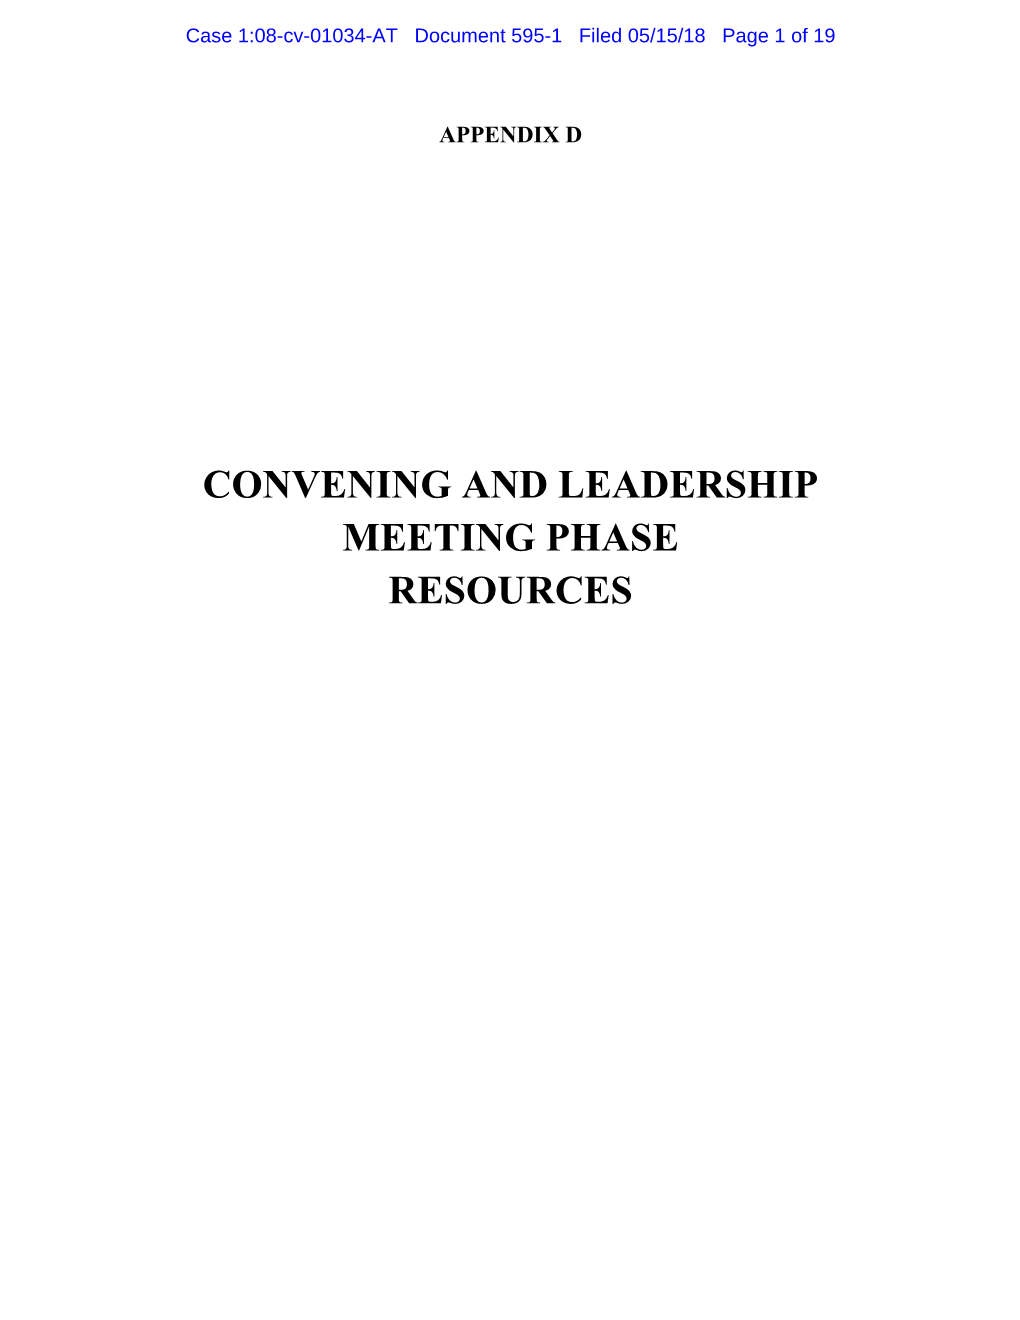 Convening and Leadership Meeting Phase Resources